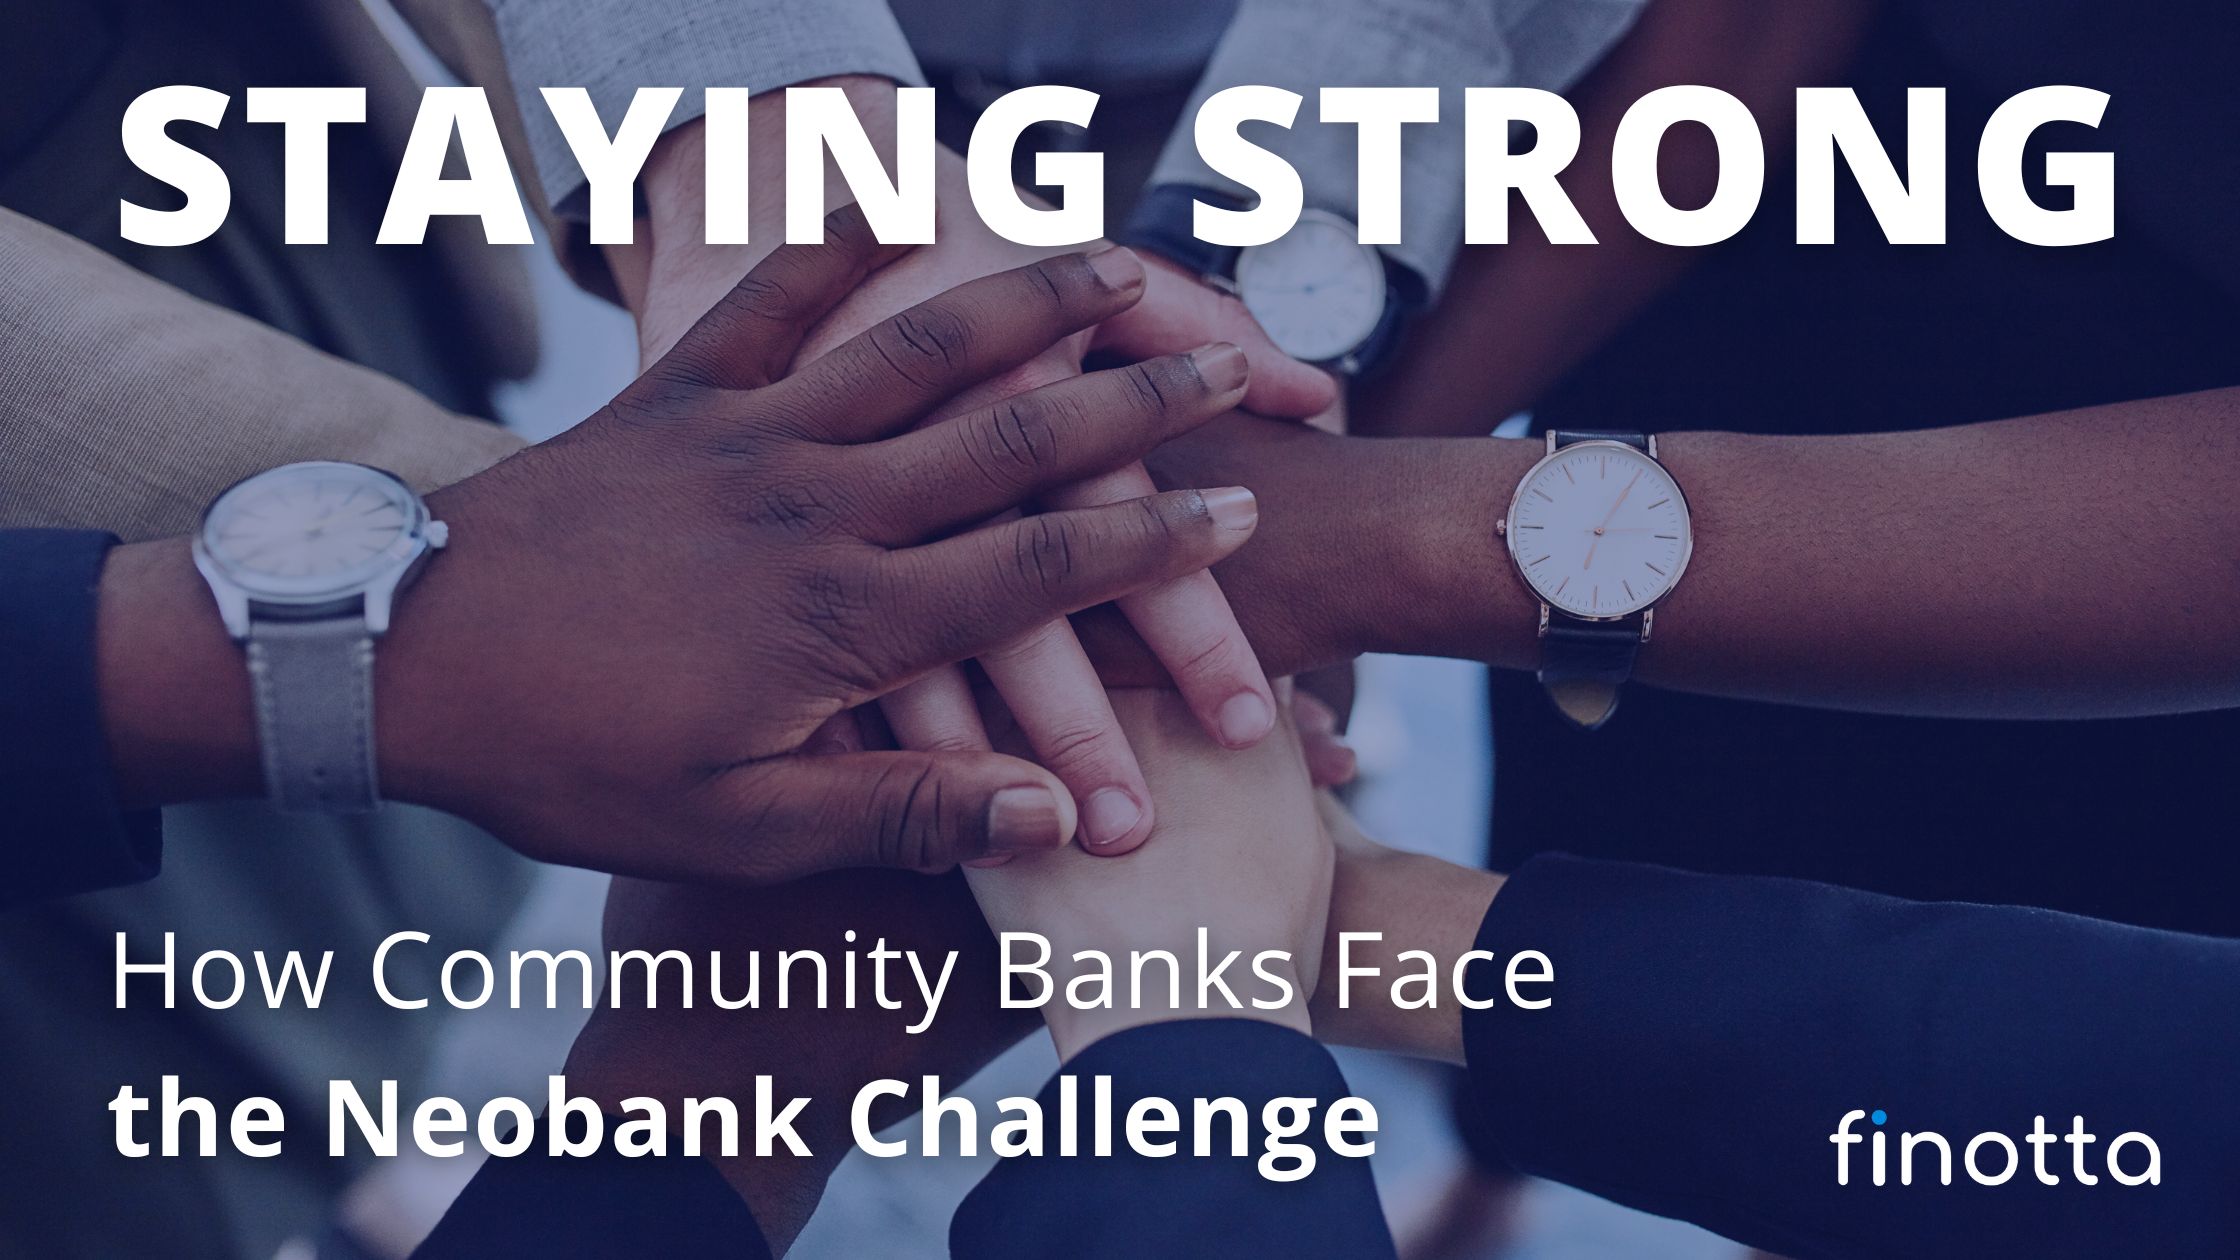 Staying Strong: How Community Banks Face the Neobank Challenge